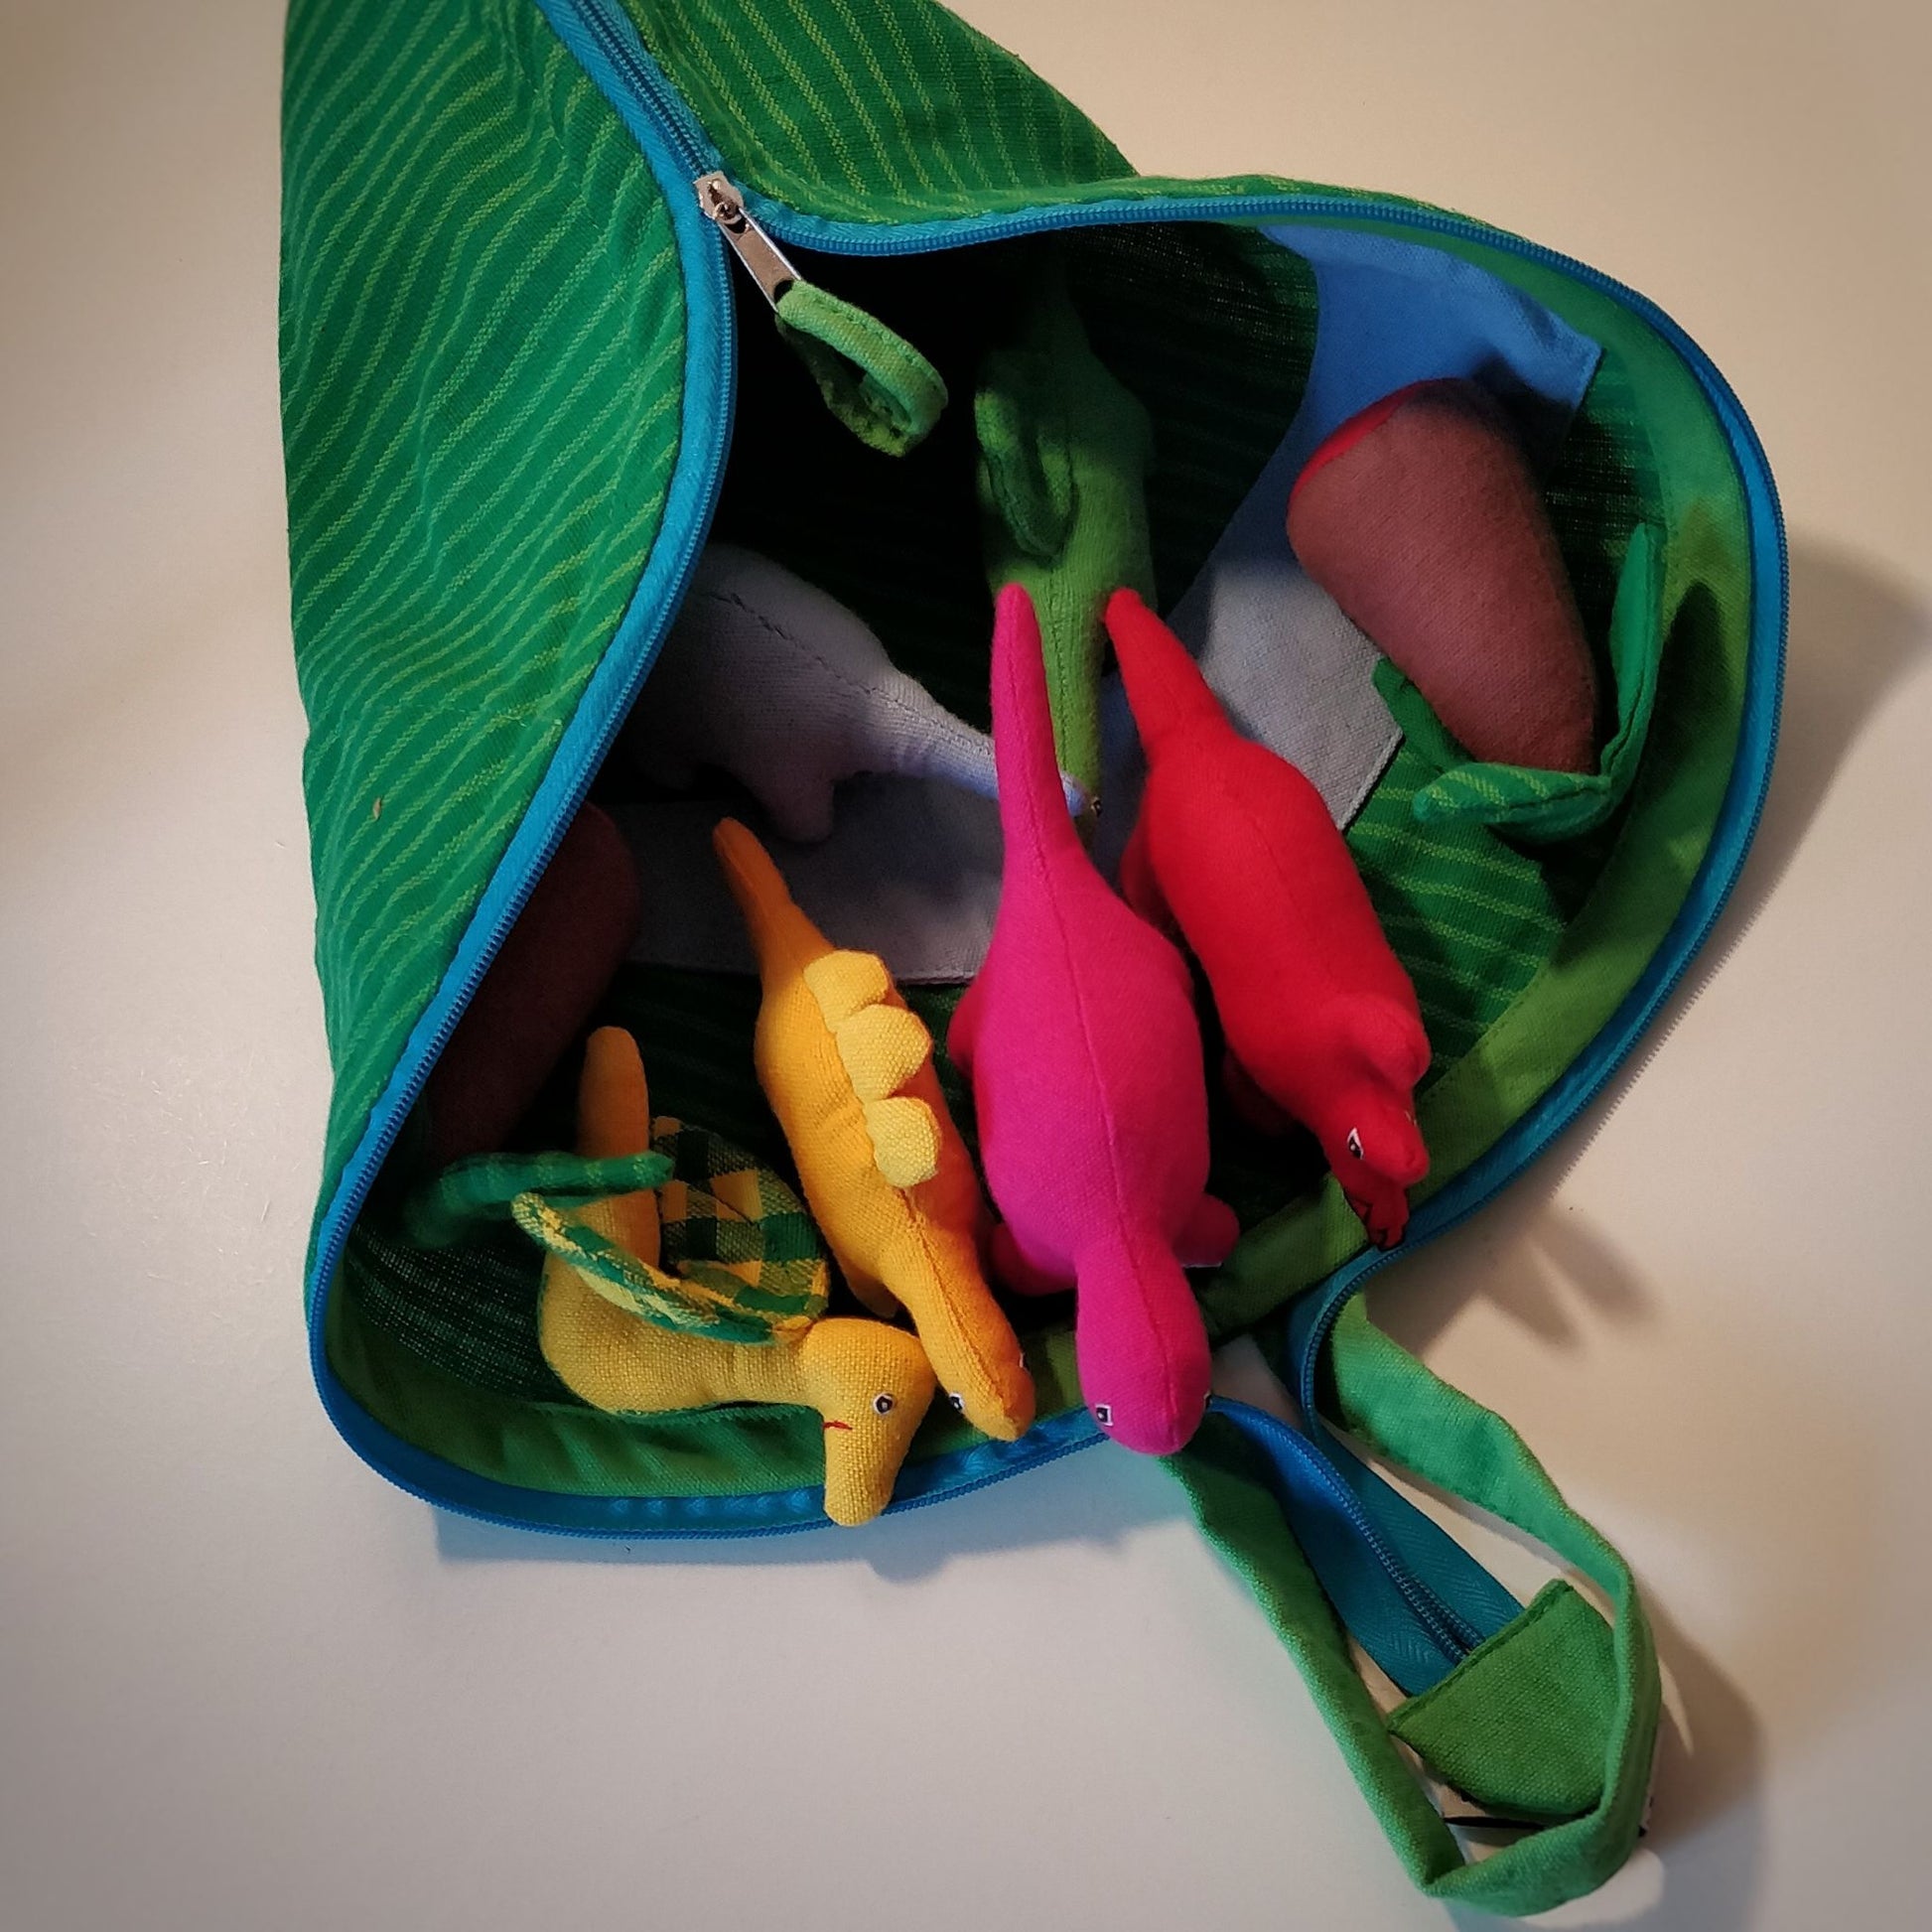 Dinosaur cotton toy play pouch - toy pouch half zipped